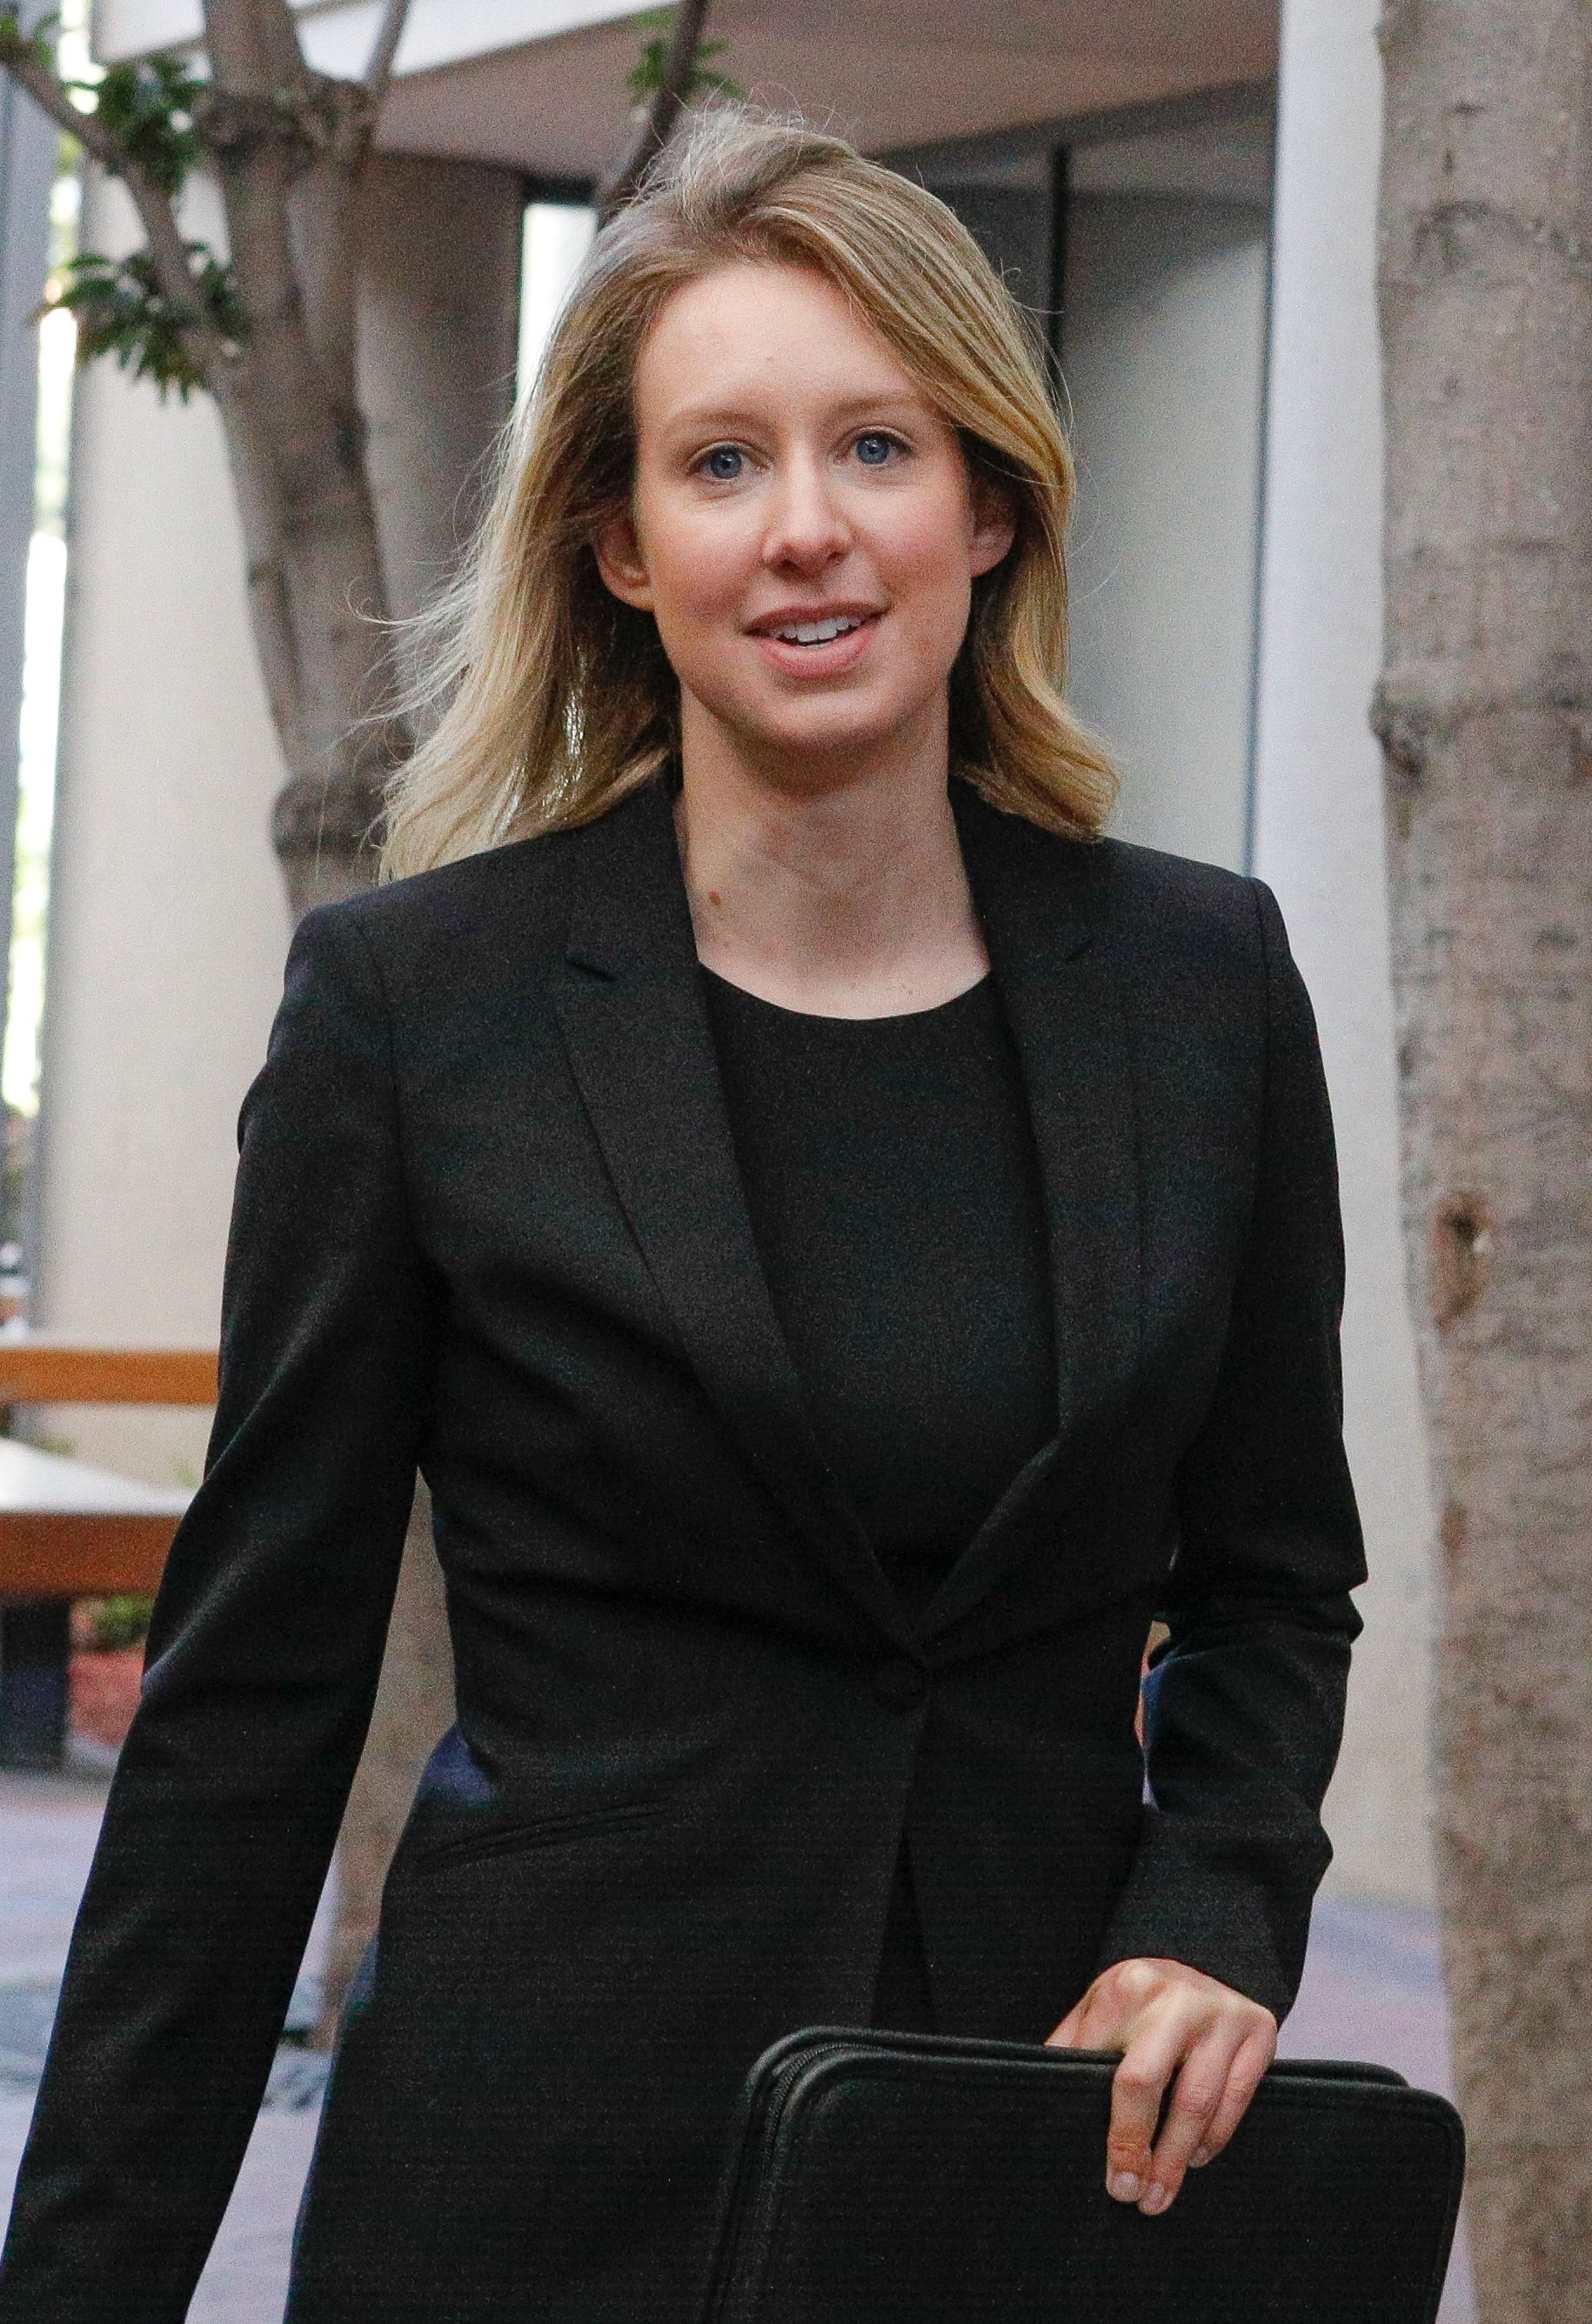 Elizabeth Holmes at federal court for a status hearing on July 17, 2019, in San Jose, California. | Source: Getty Images